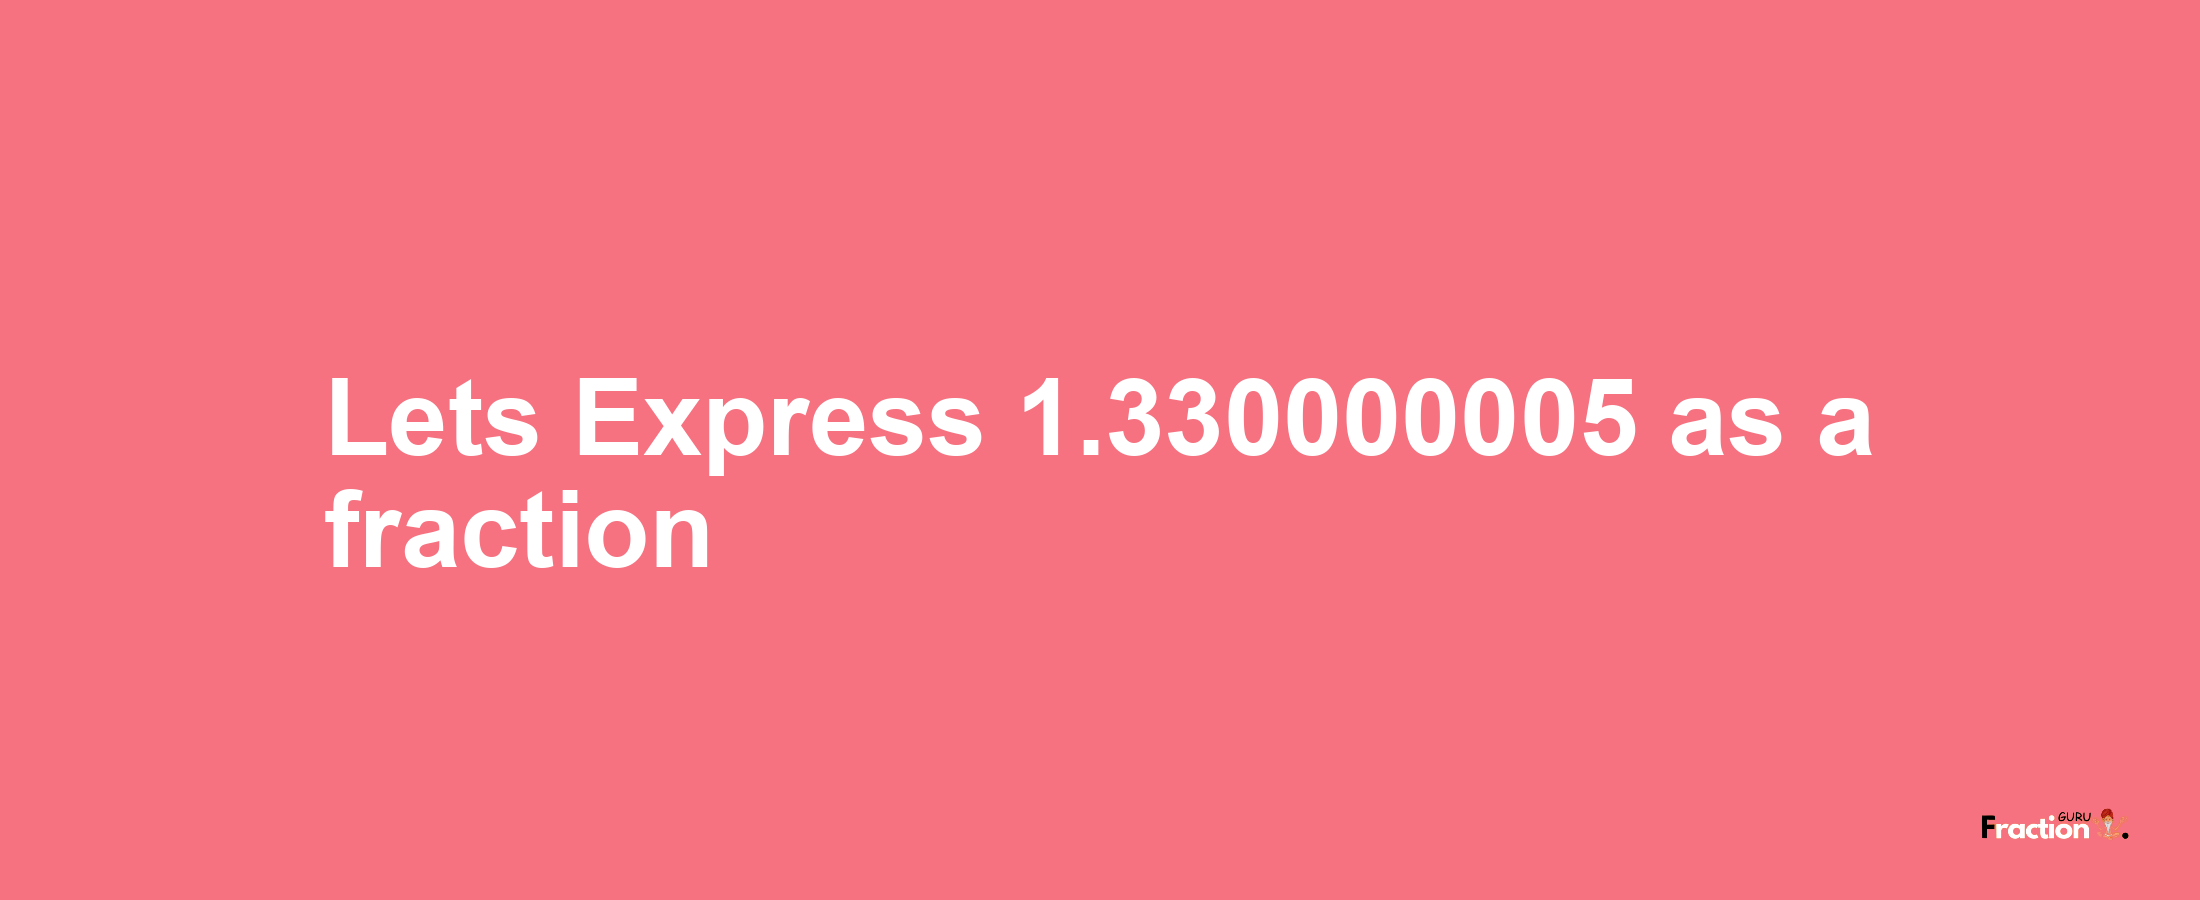 Lets Express 1.330000005 as afraction